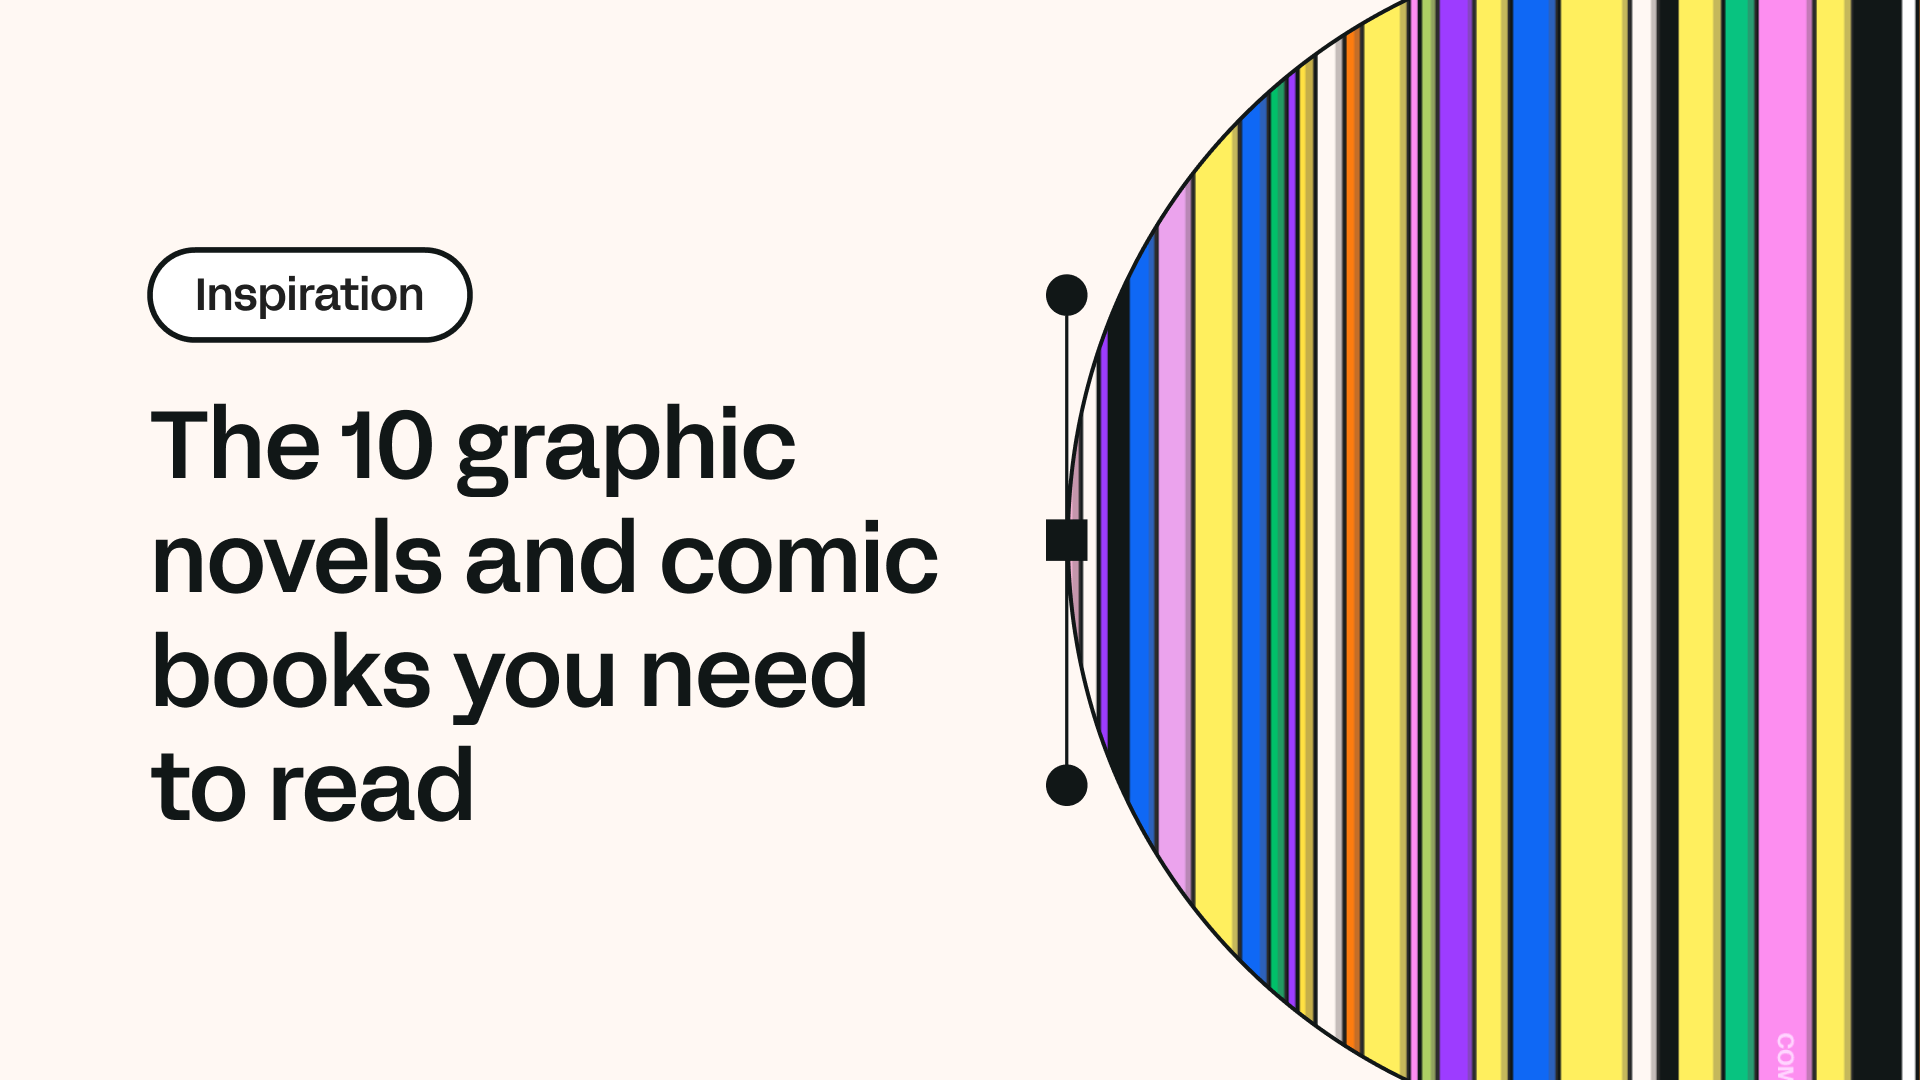 The 10 graphic novels and comic books you need to read | Linearity